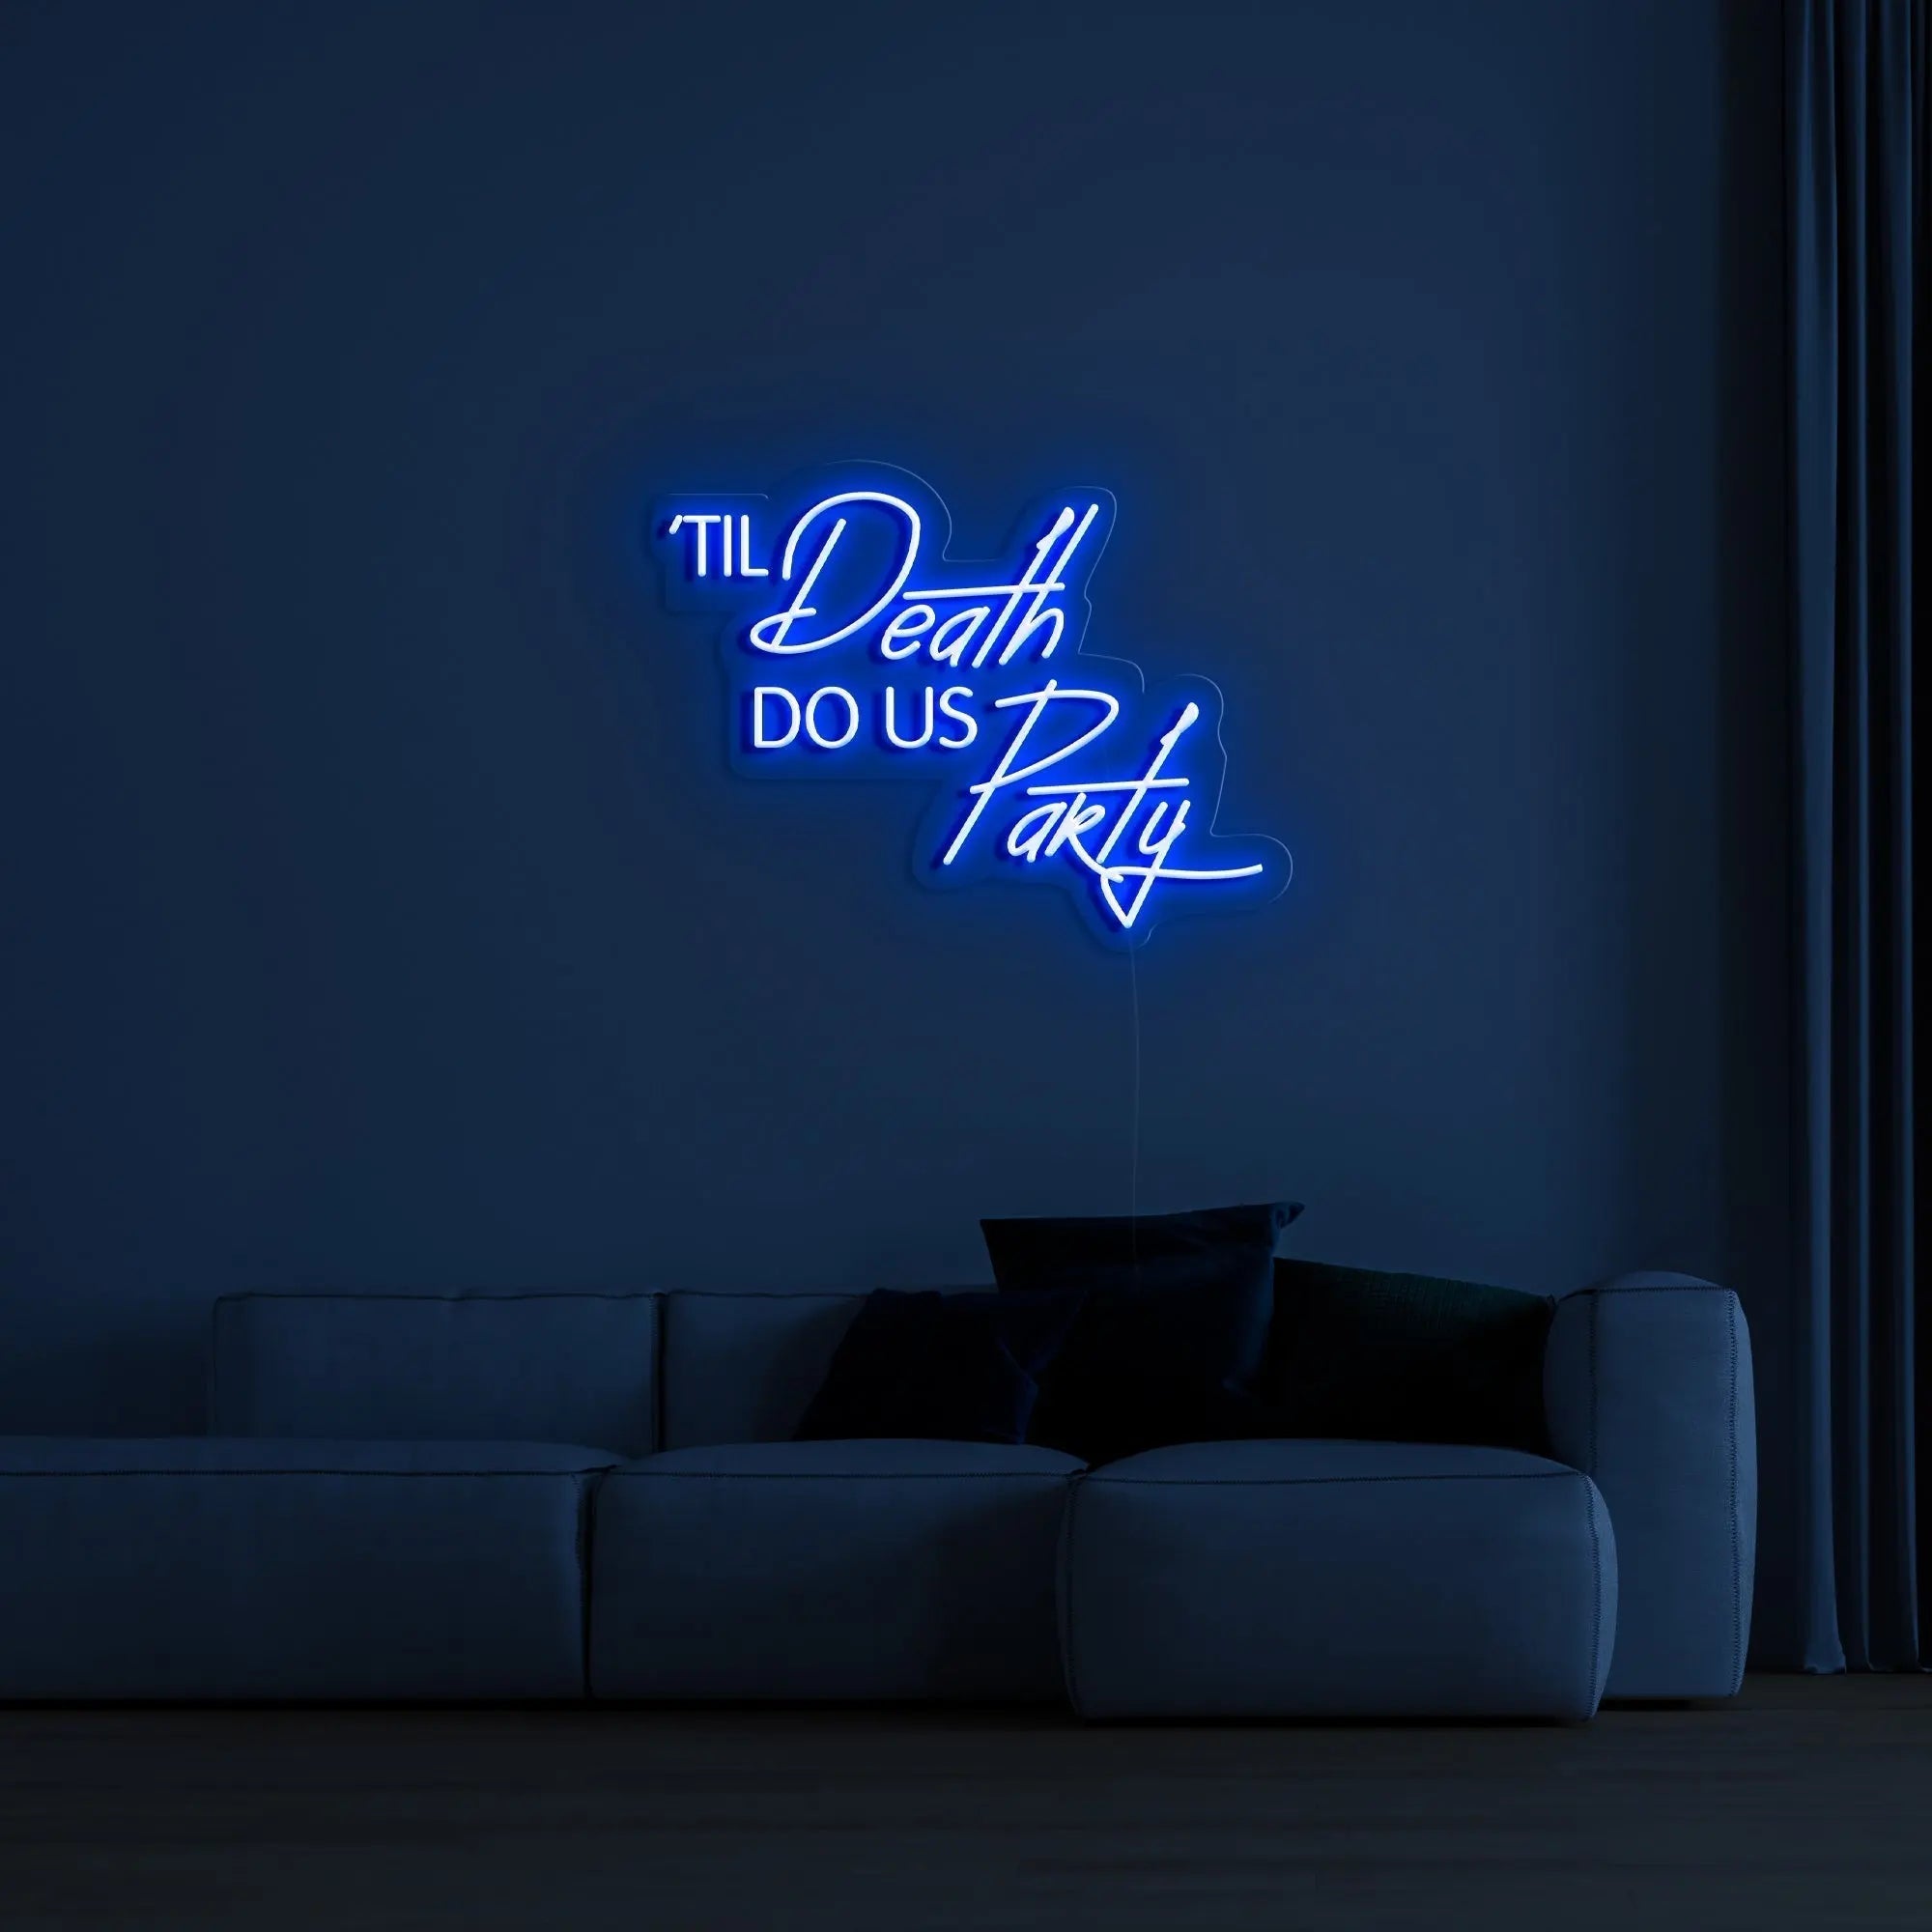 'Till Death Do Us Party' LED Neon Sign - neonaffair